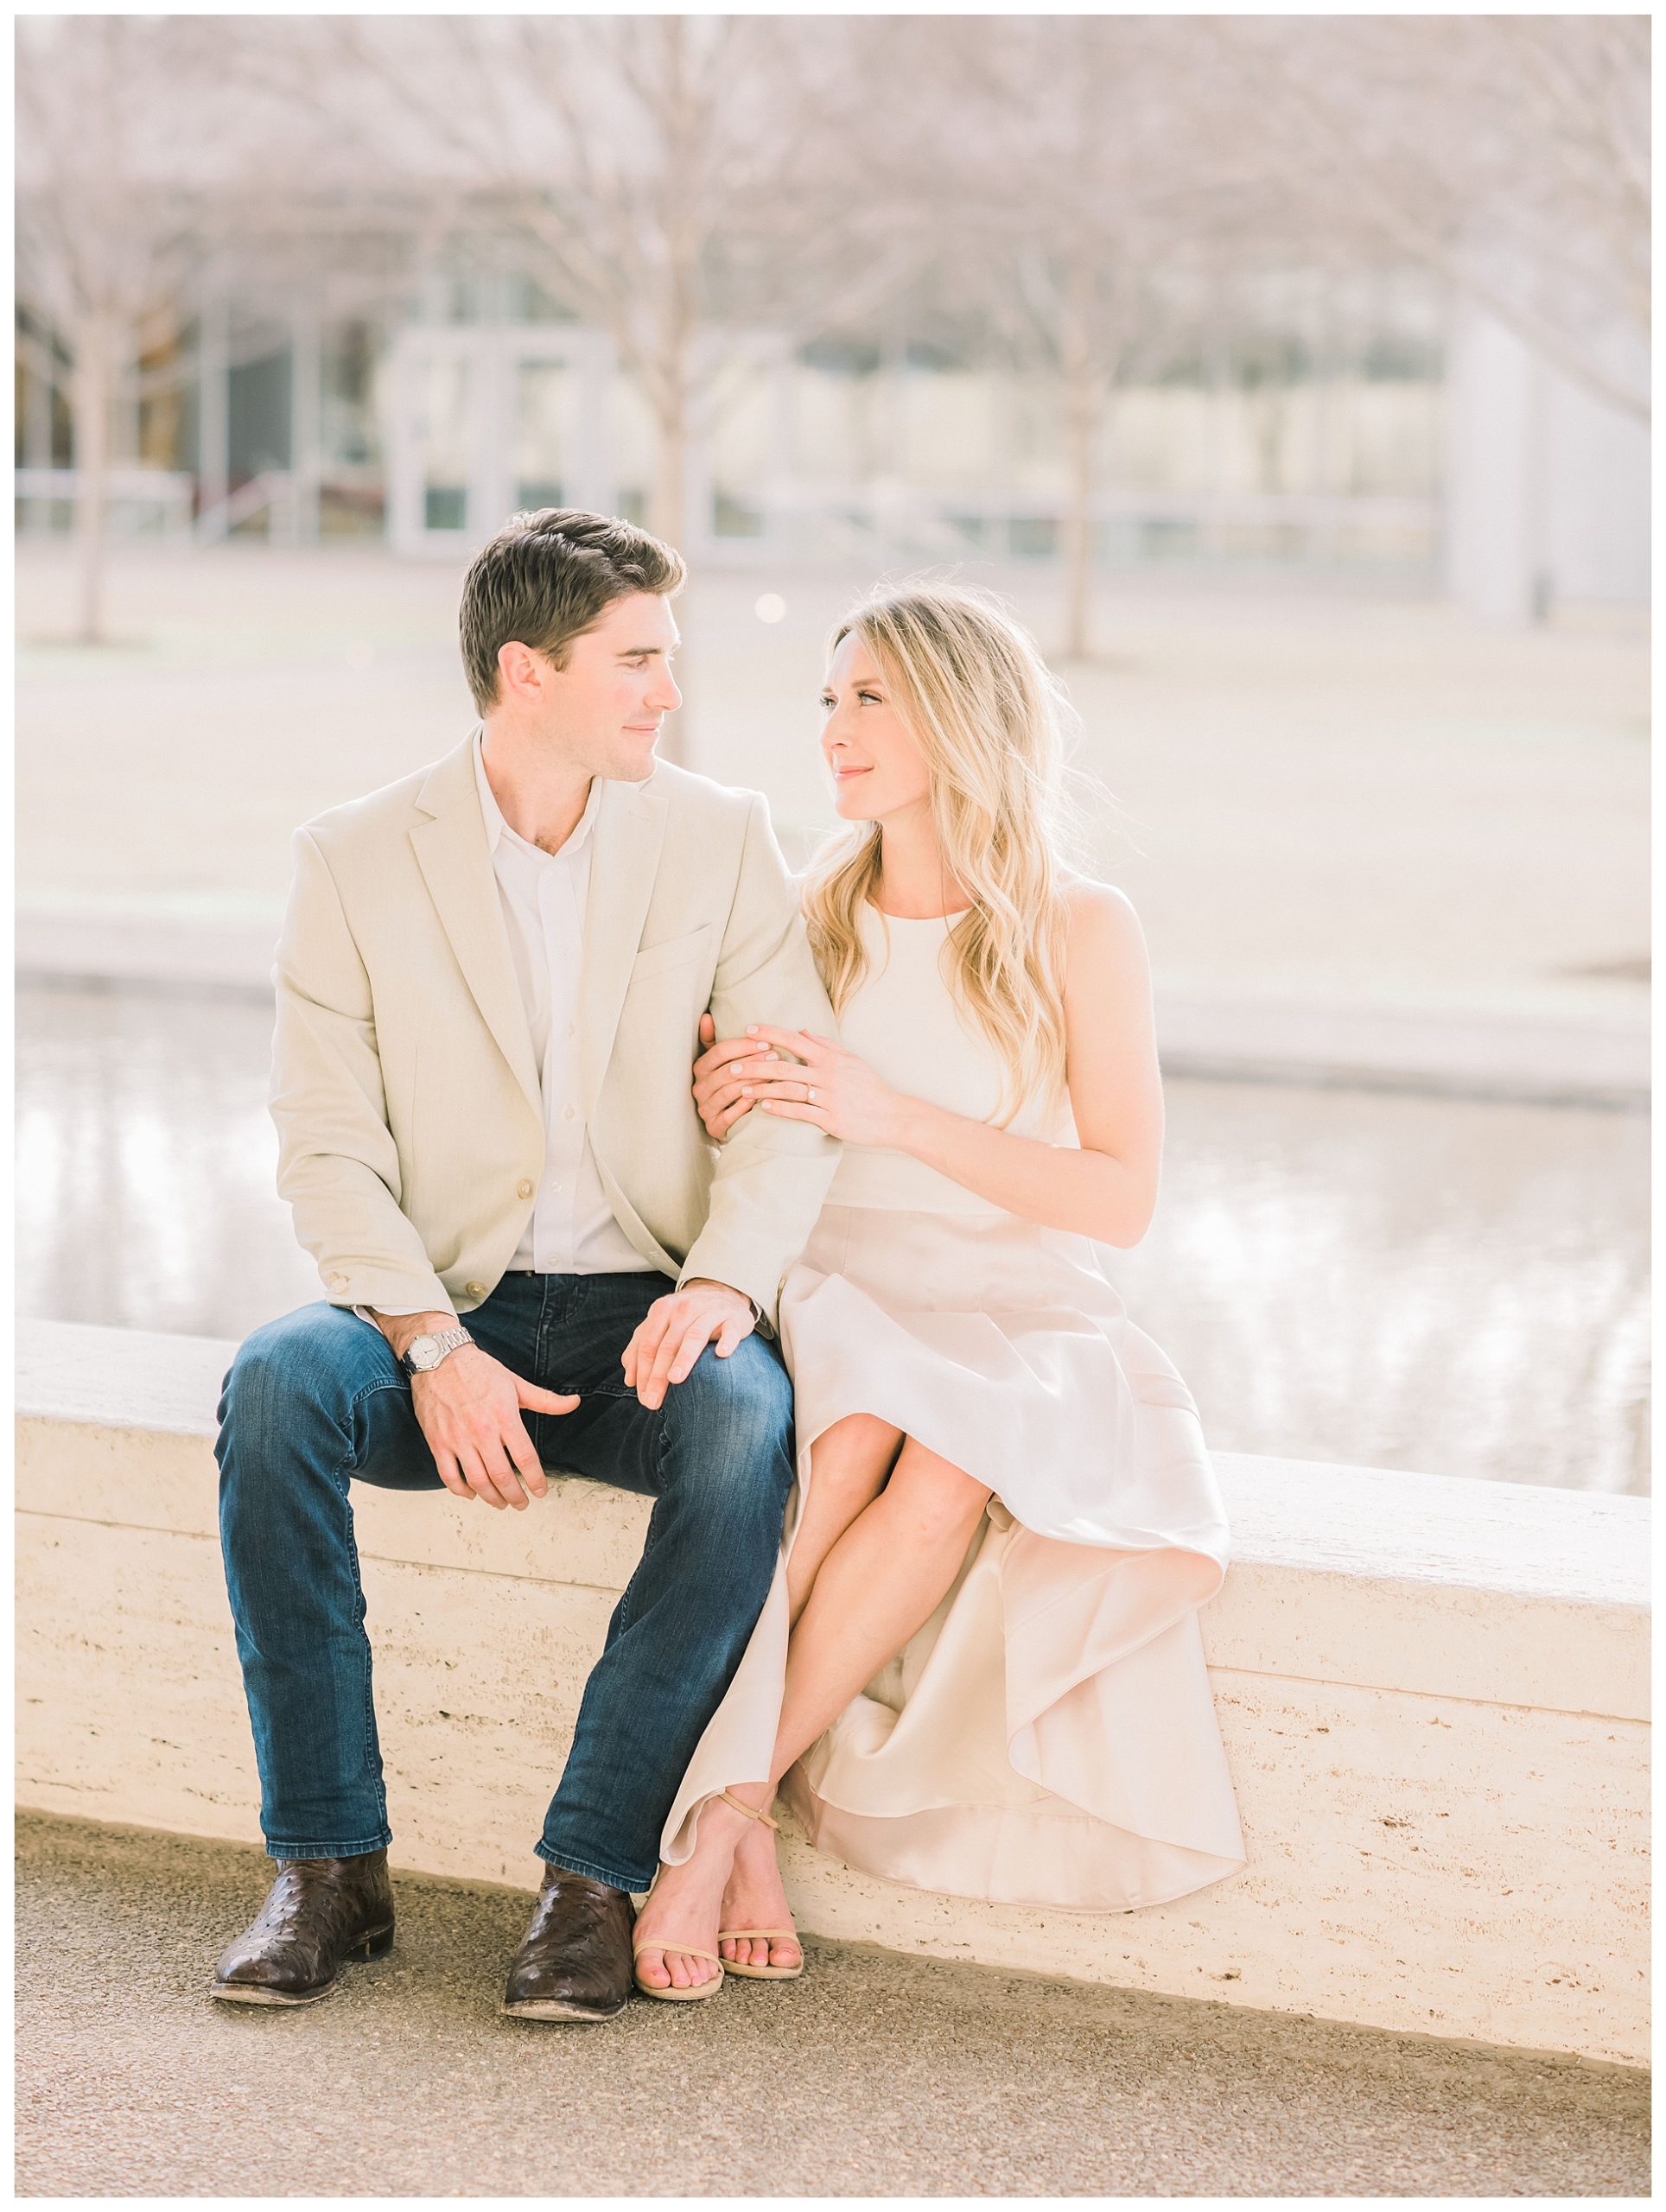 tips for posing during an engagement session